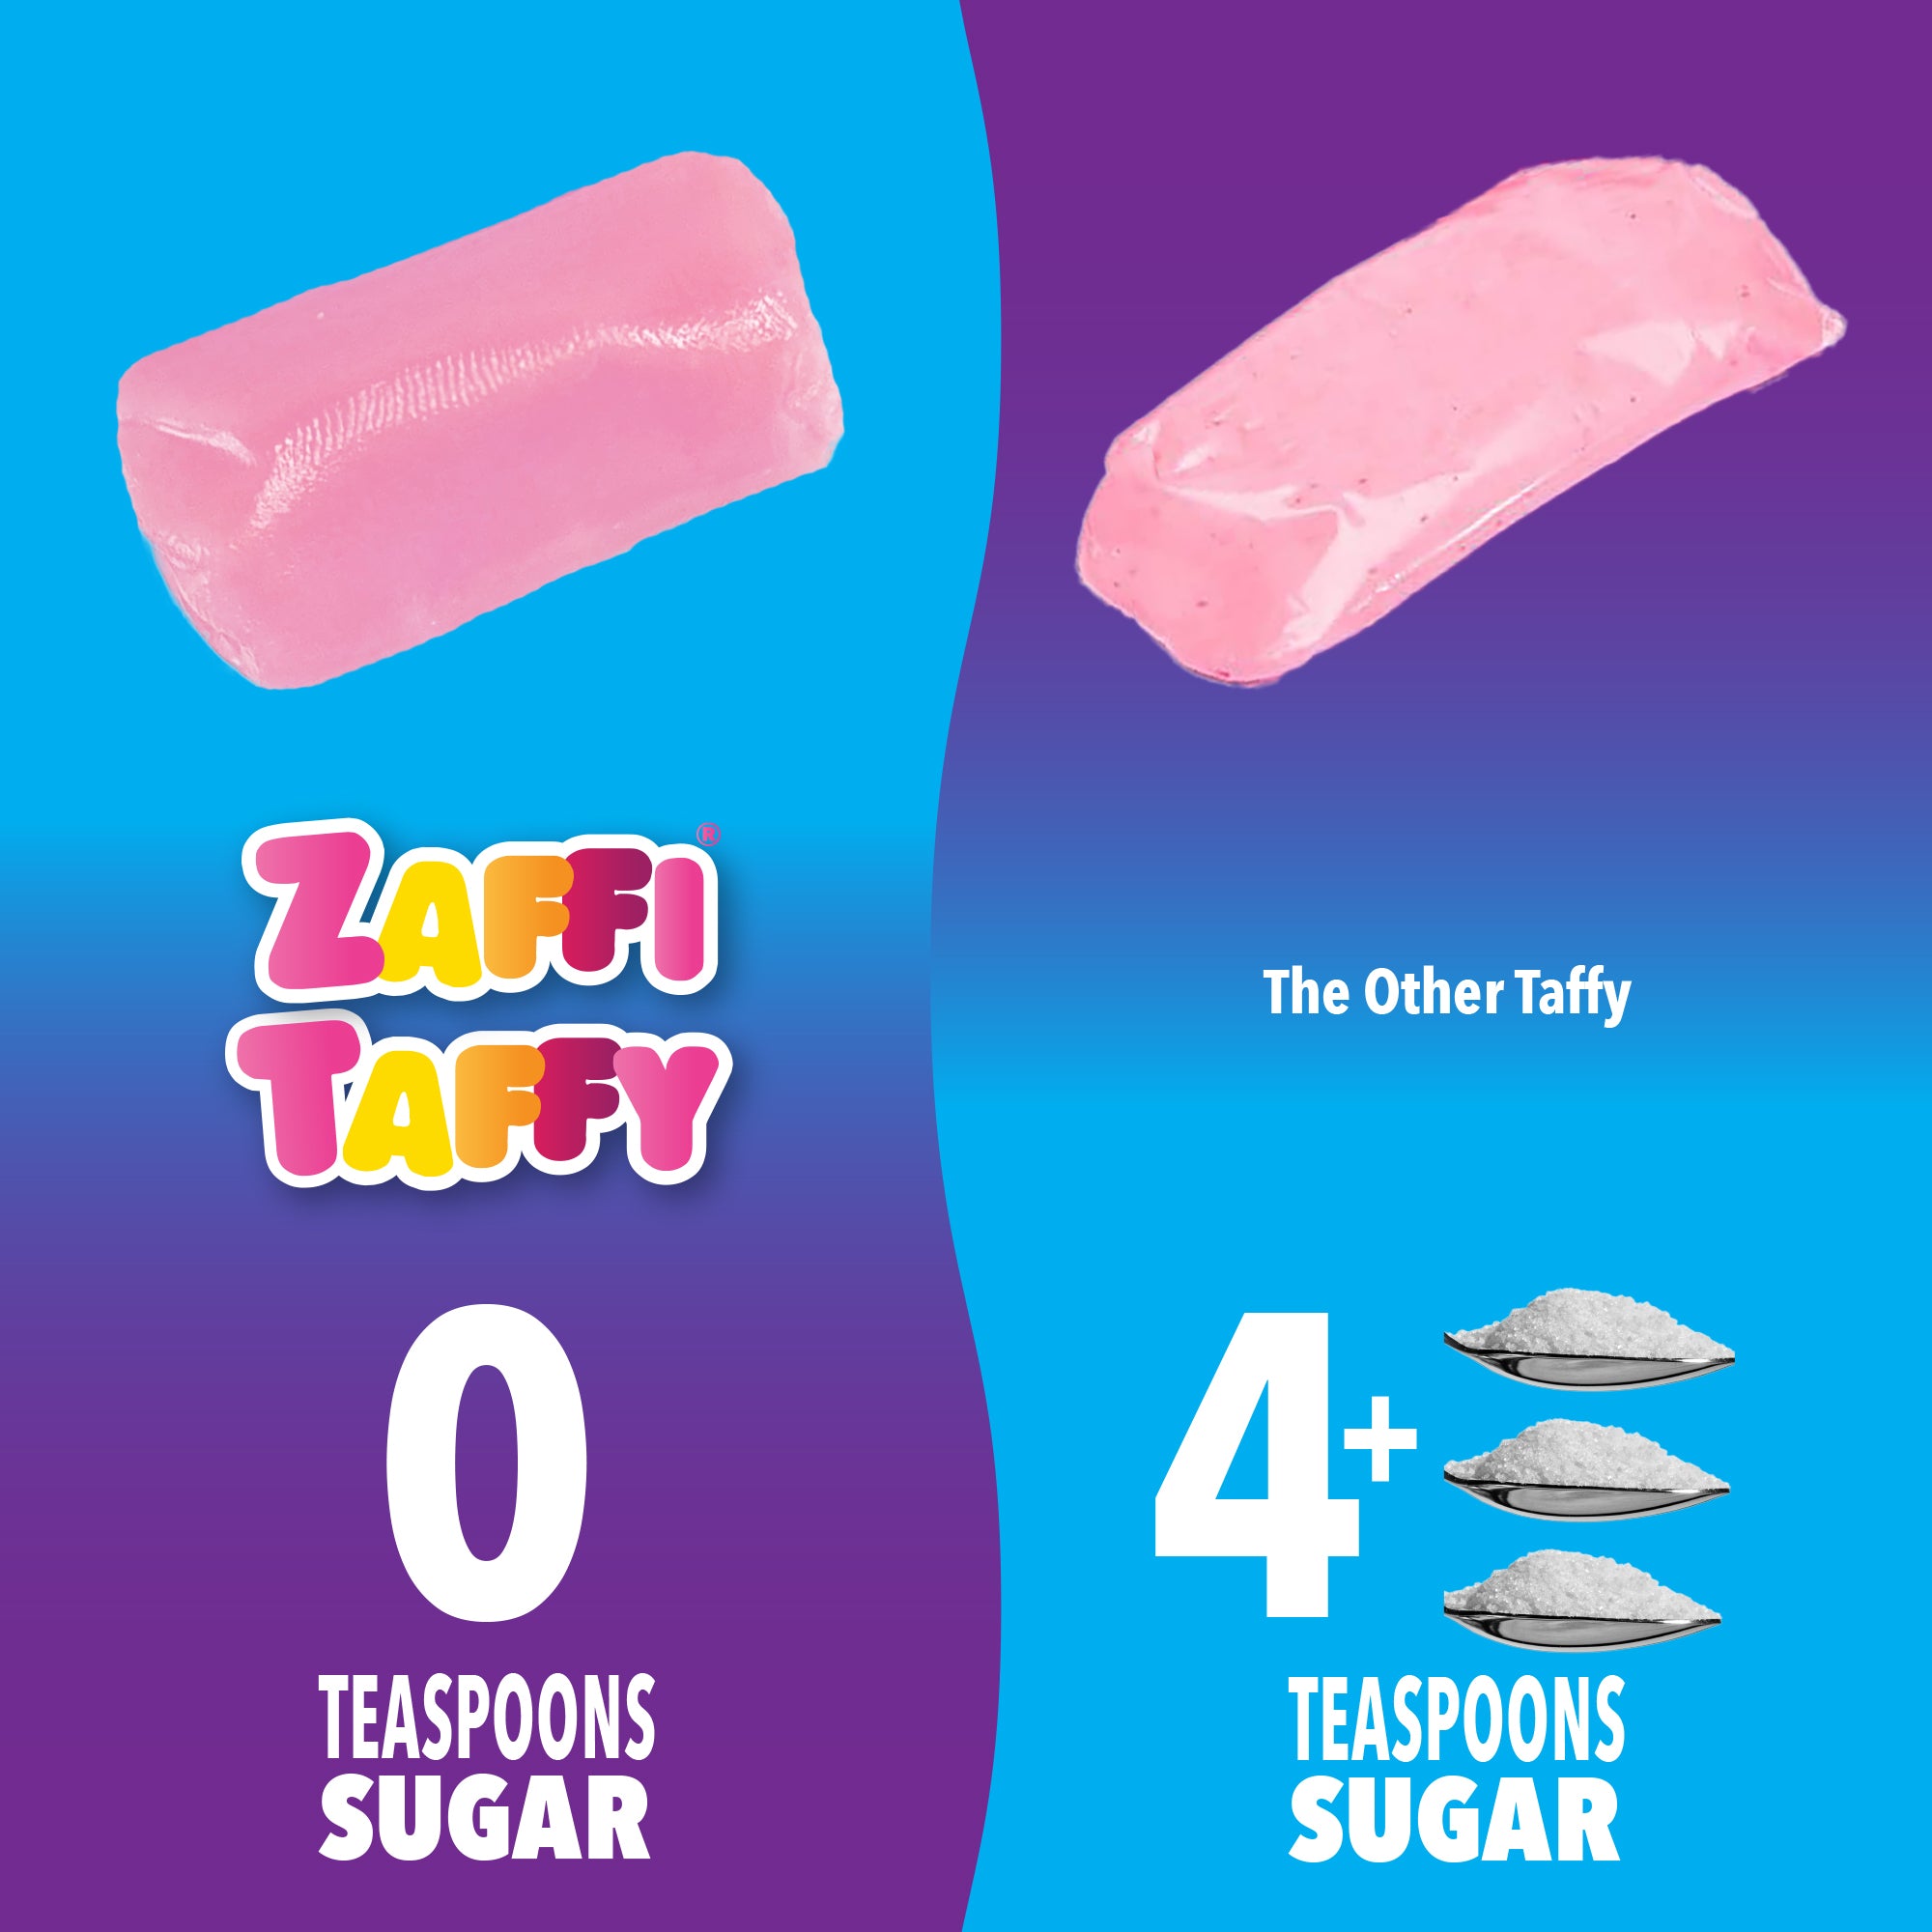 Zolli Taffy has 0 teaspoons of suger. Other taffy has 4 plus teaspoons of sugar.